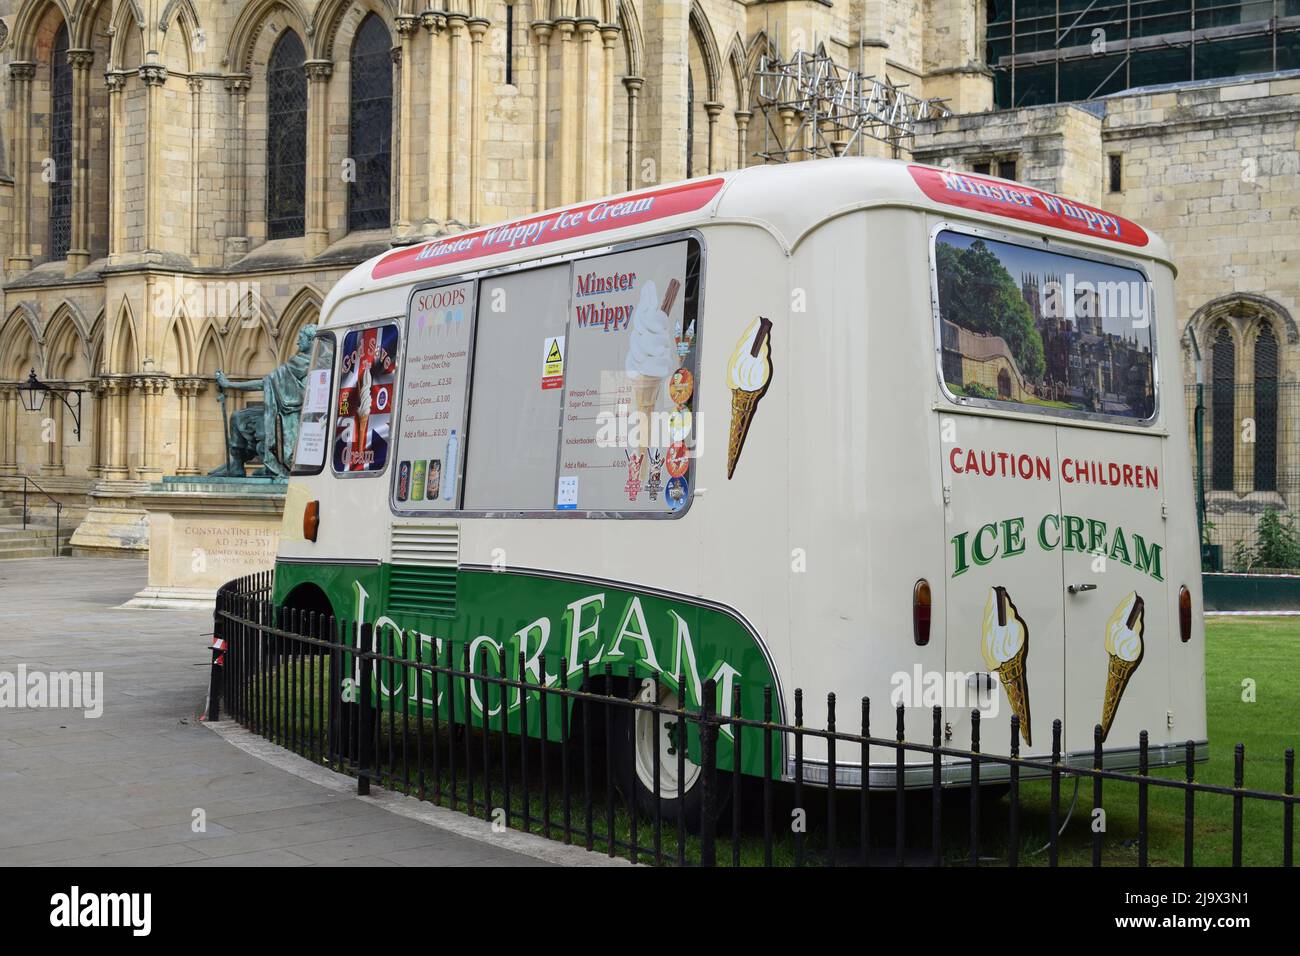 Minster Whippy Ice Cream Truck Royaume-Uni Banque D'Images